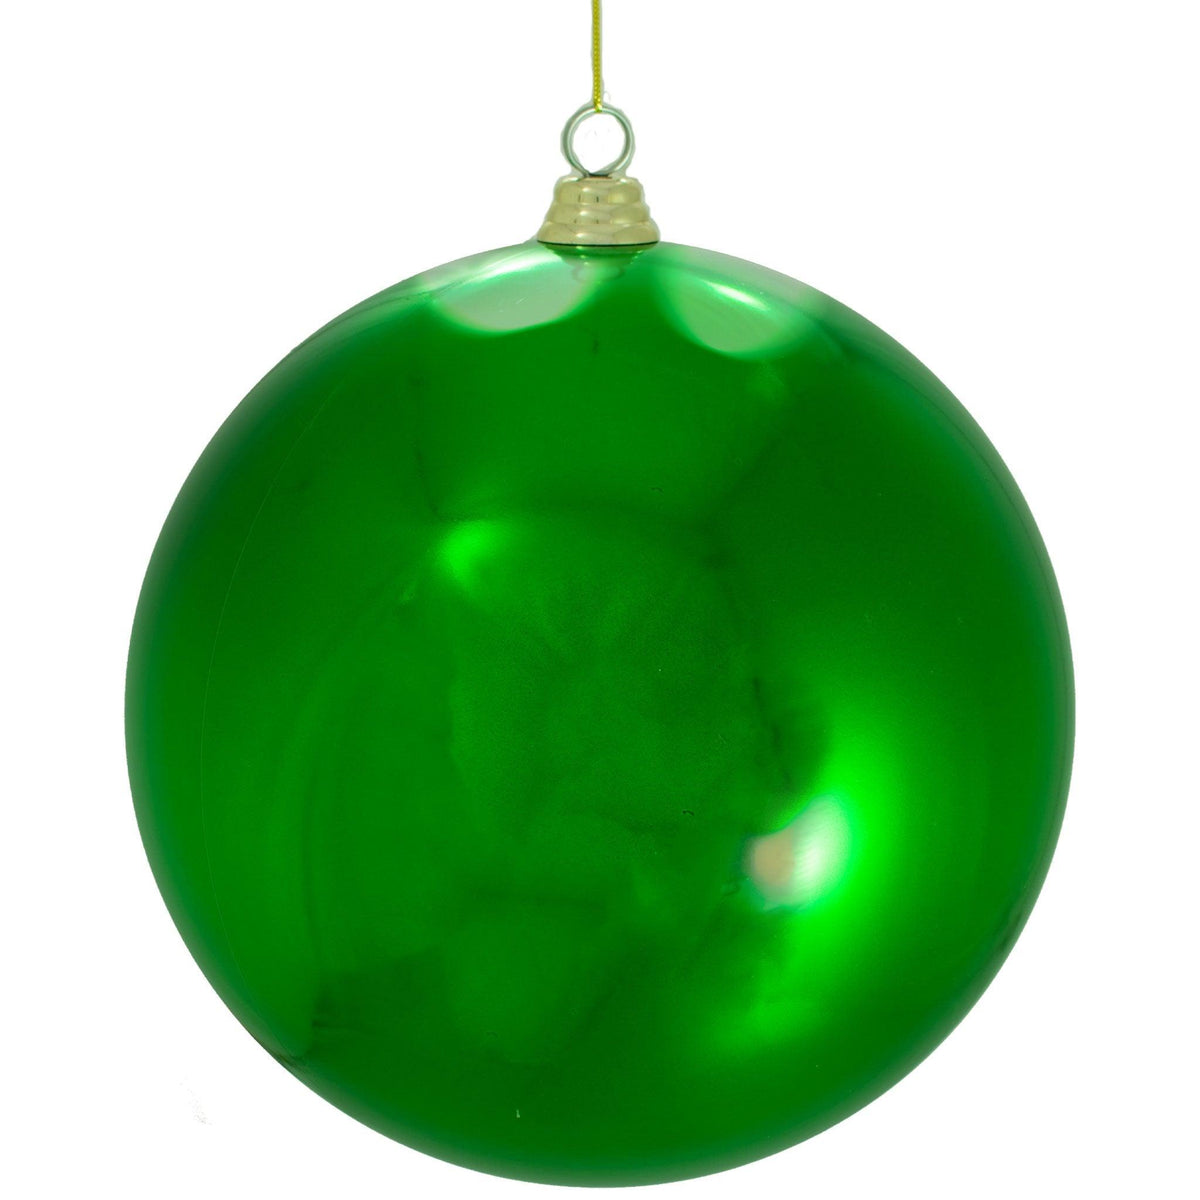 12in Diameter Shiny Green Ball Ornaments are shatterproof plastic and sold in extra large sizes